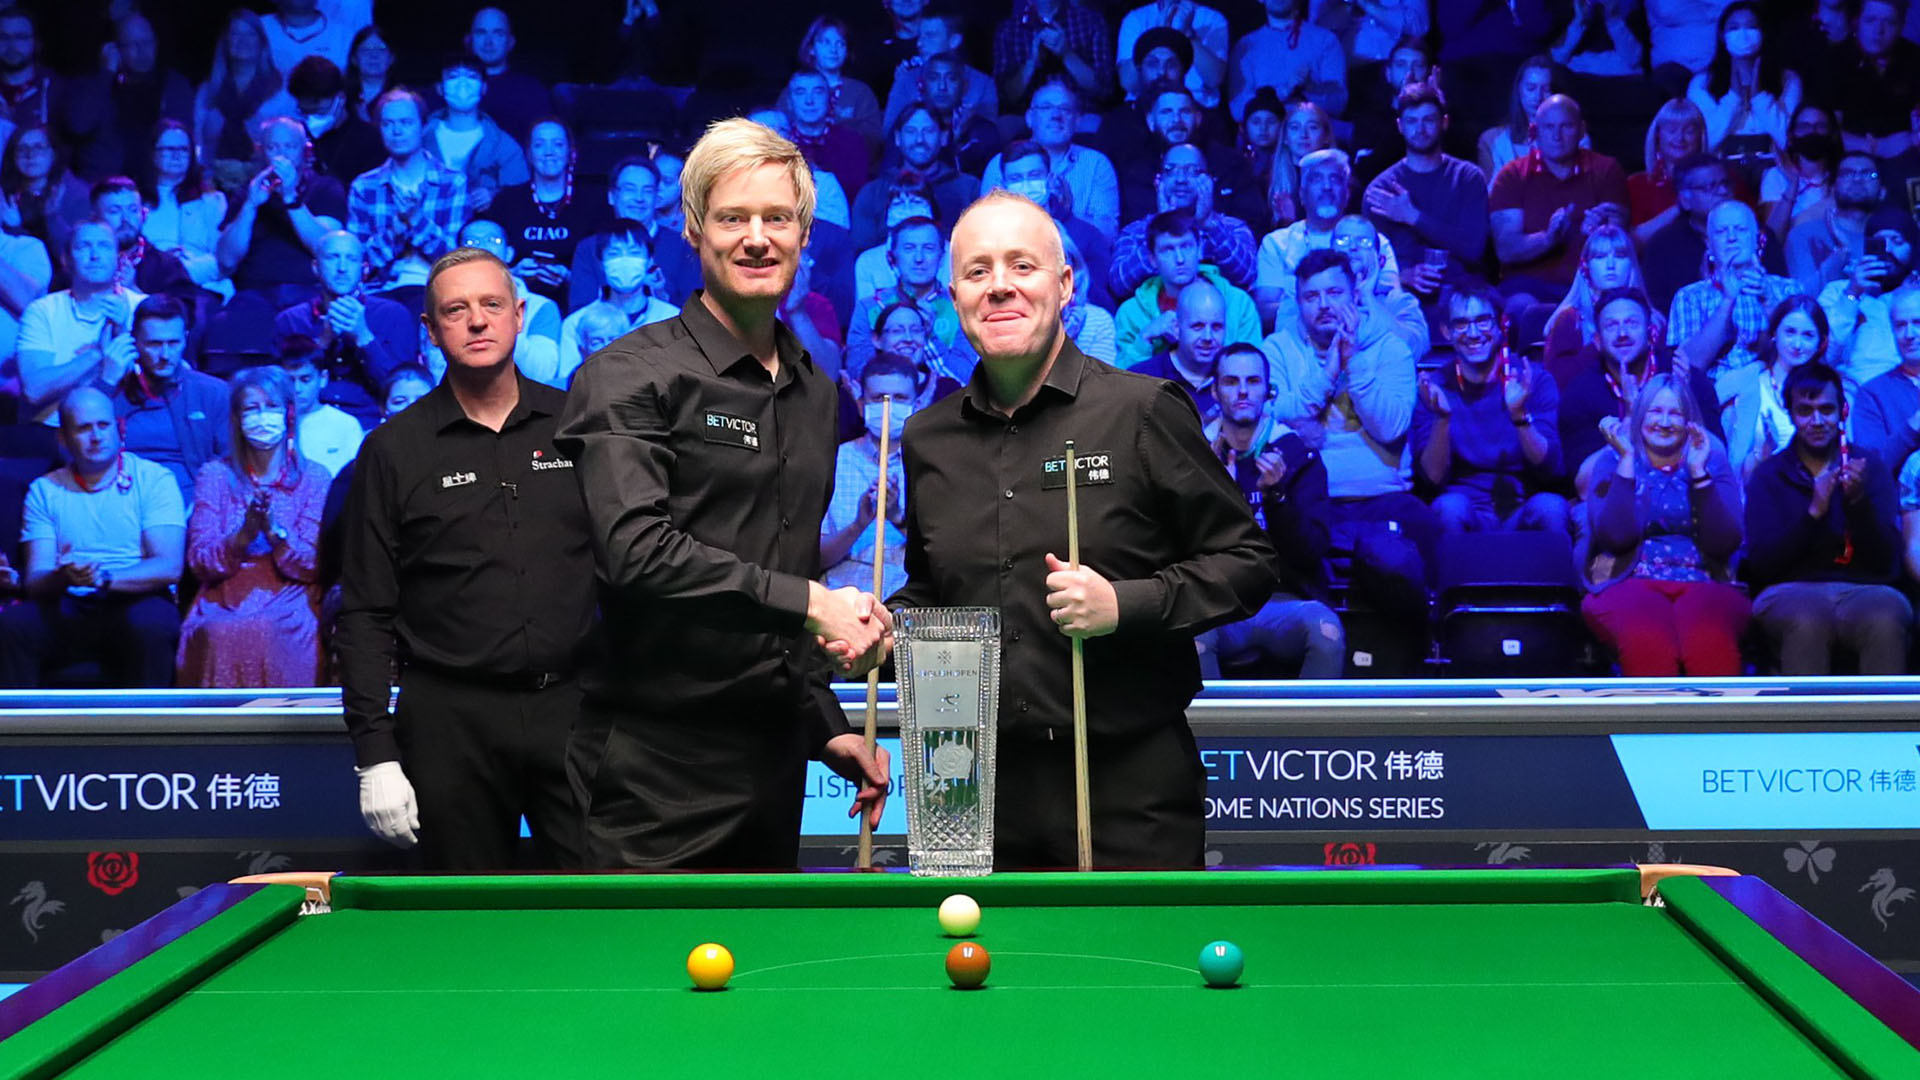 snooker results neil robertson